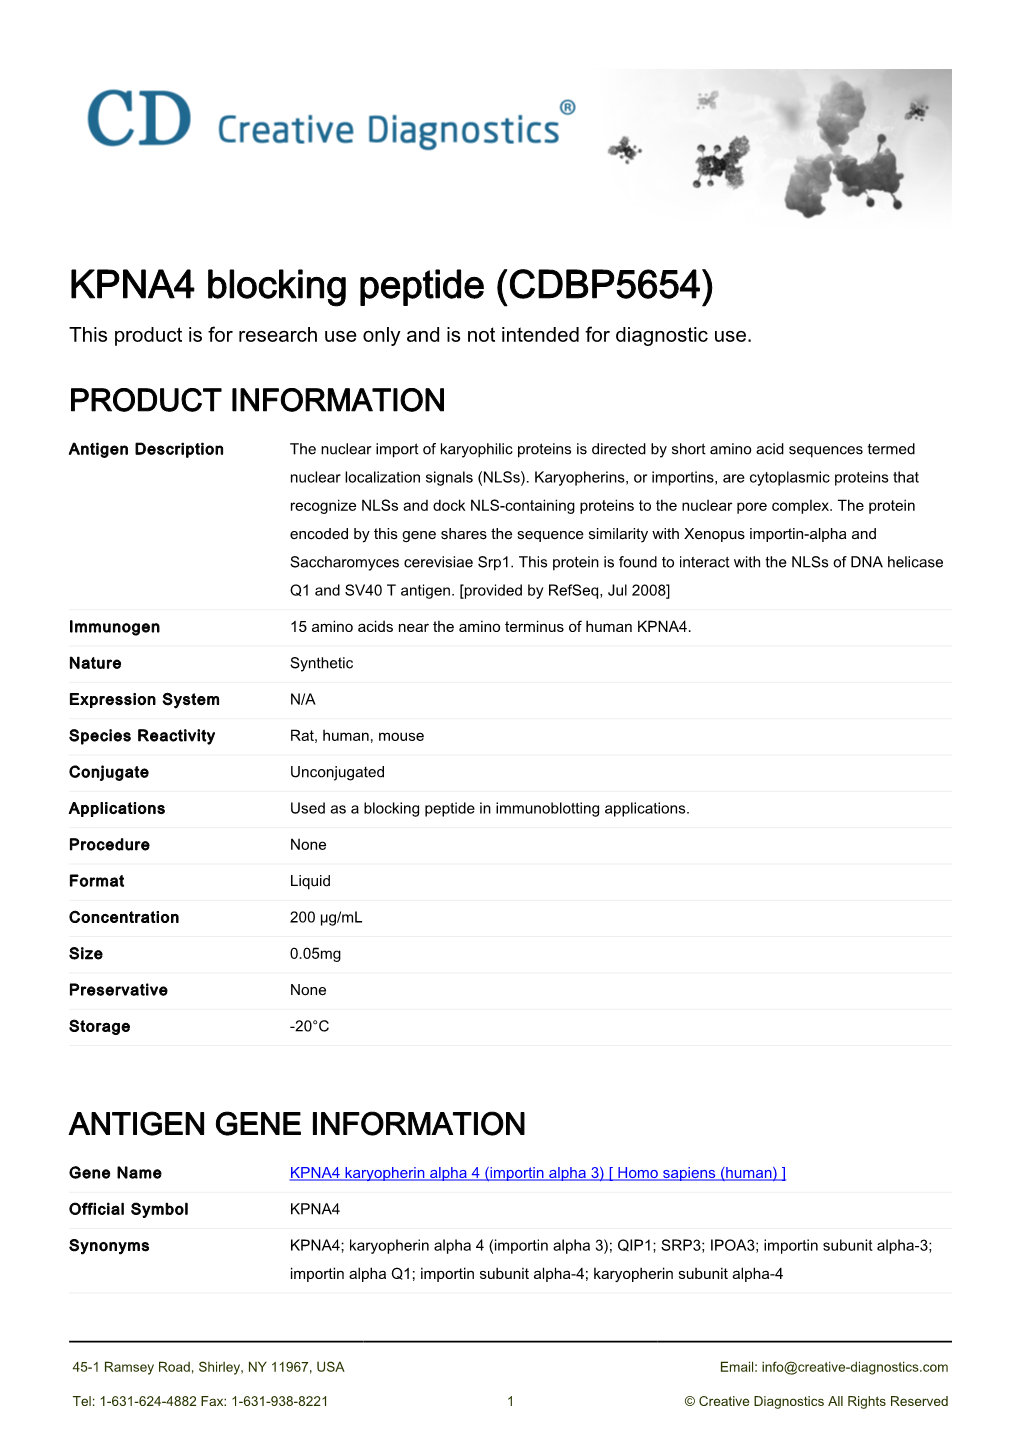 KPNA4 Blocking Peptide (CDBP5654) This Product Is for Research Use Only and Is Not Intended for Diagnostic Use